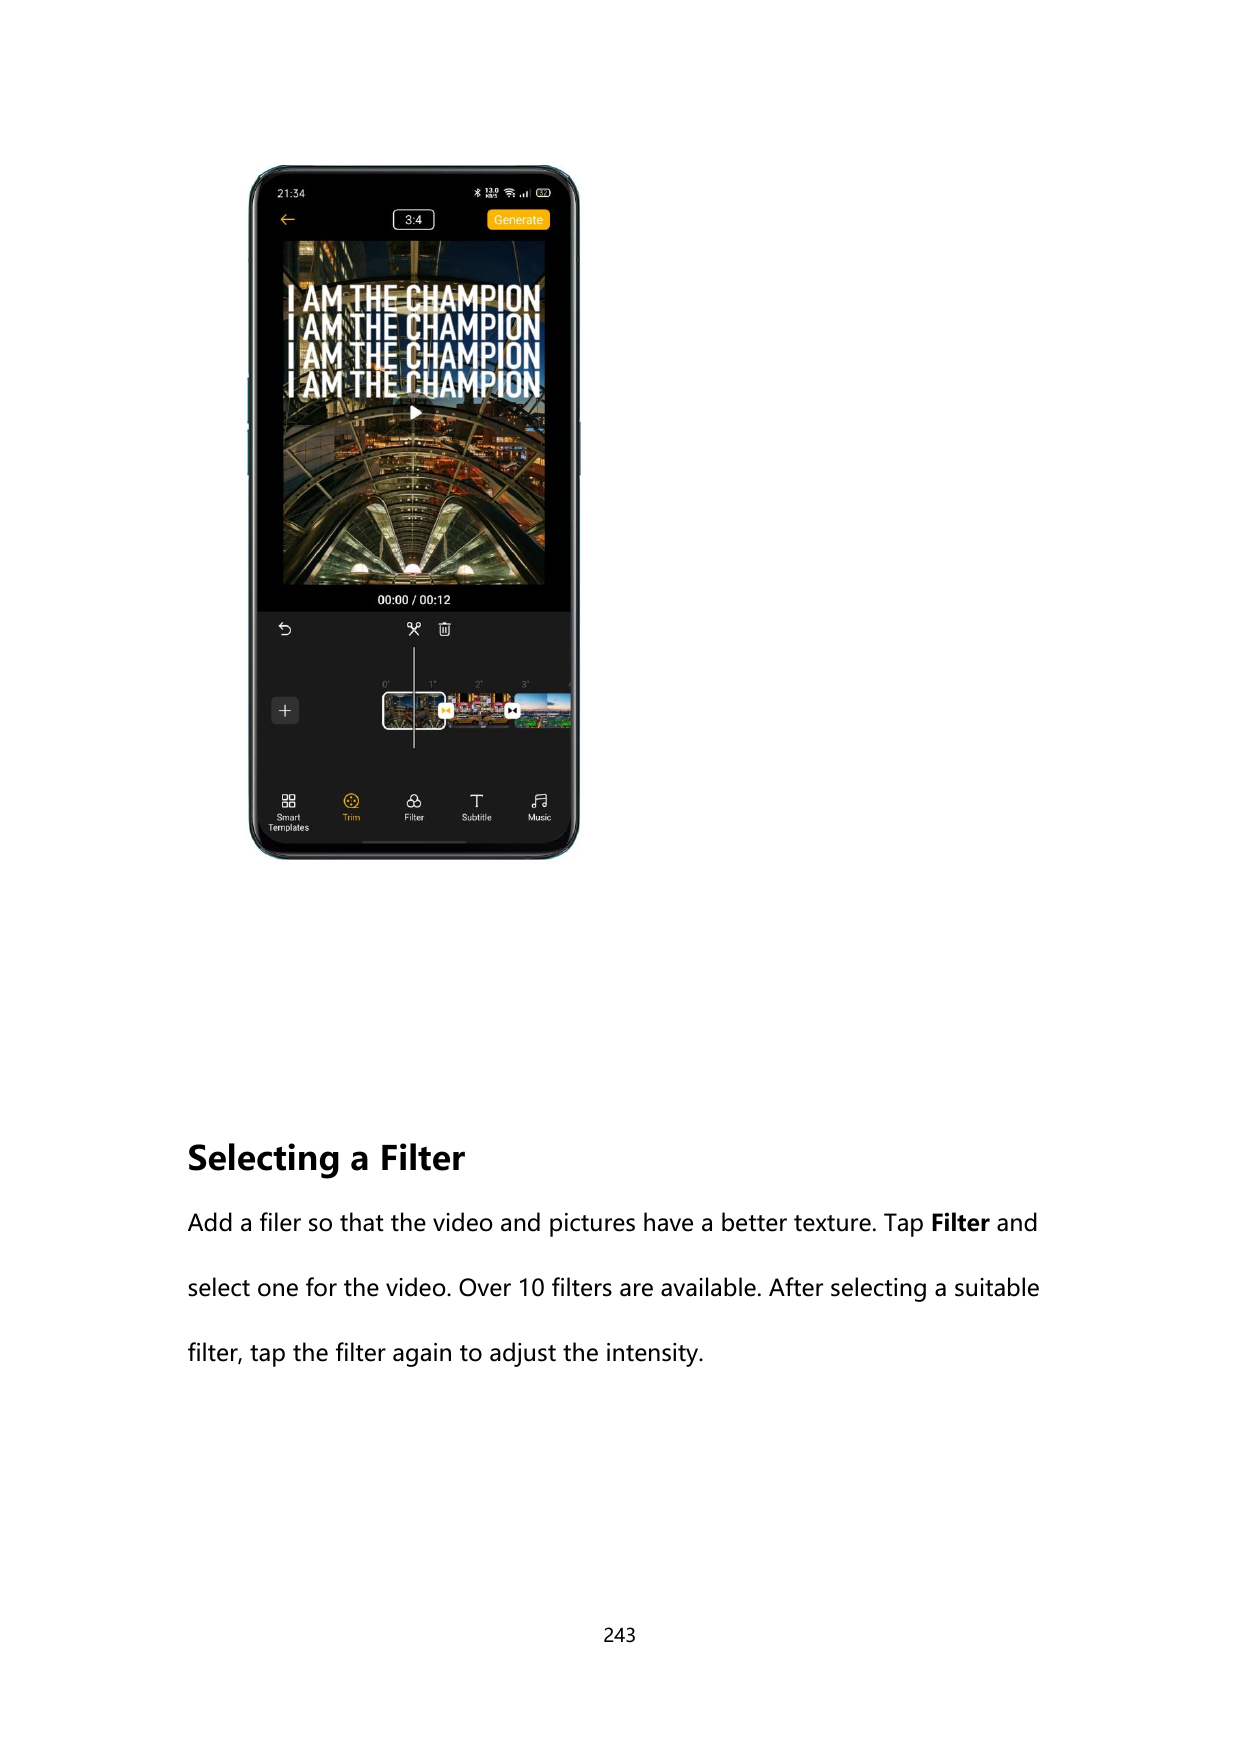 Selecting a FilterAdd a filer so that the video and pictures have a better texture. Tap Filter andselect one for the video. Over